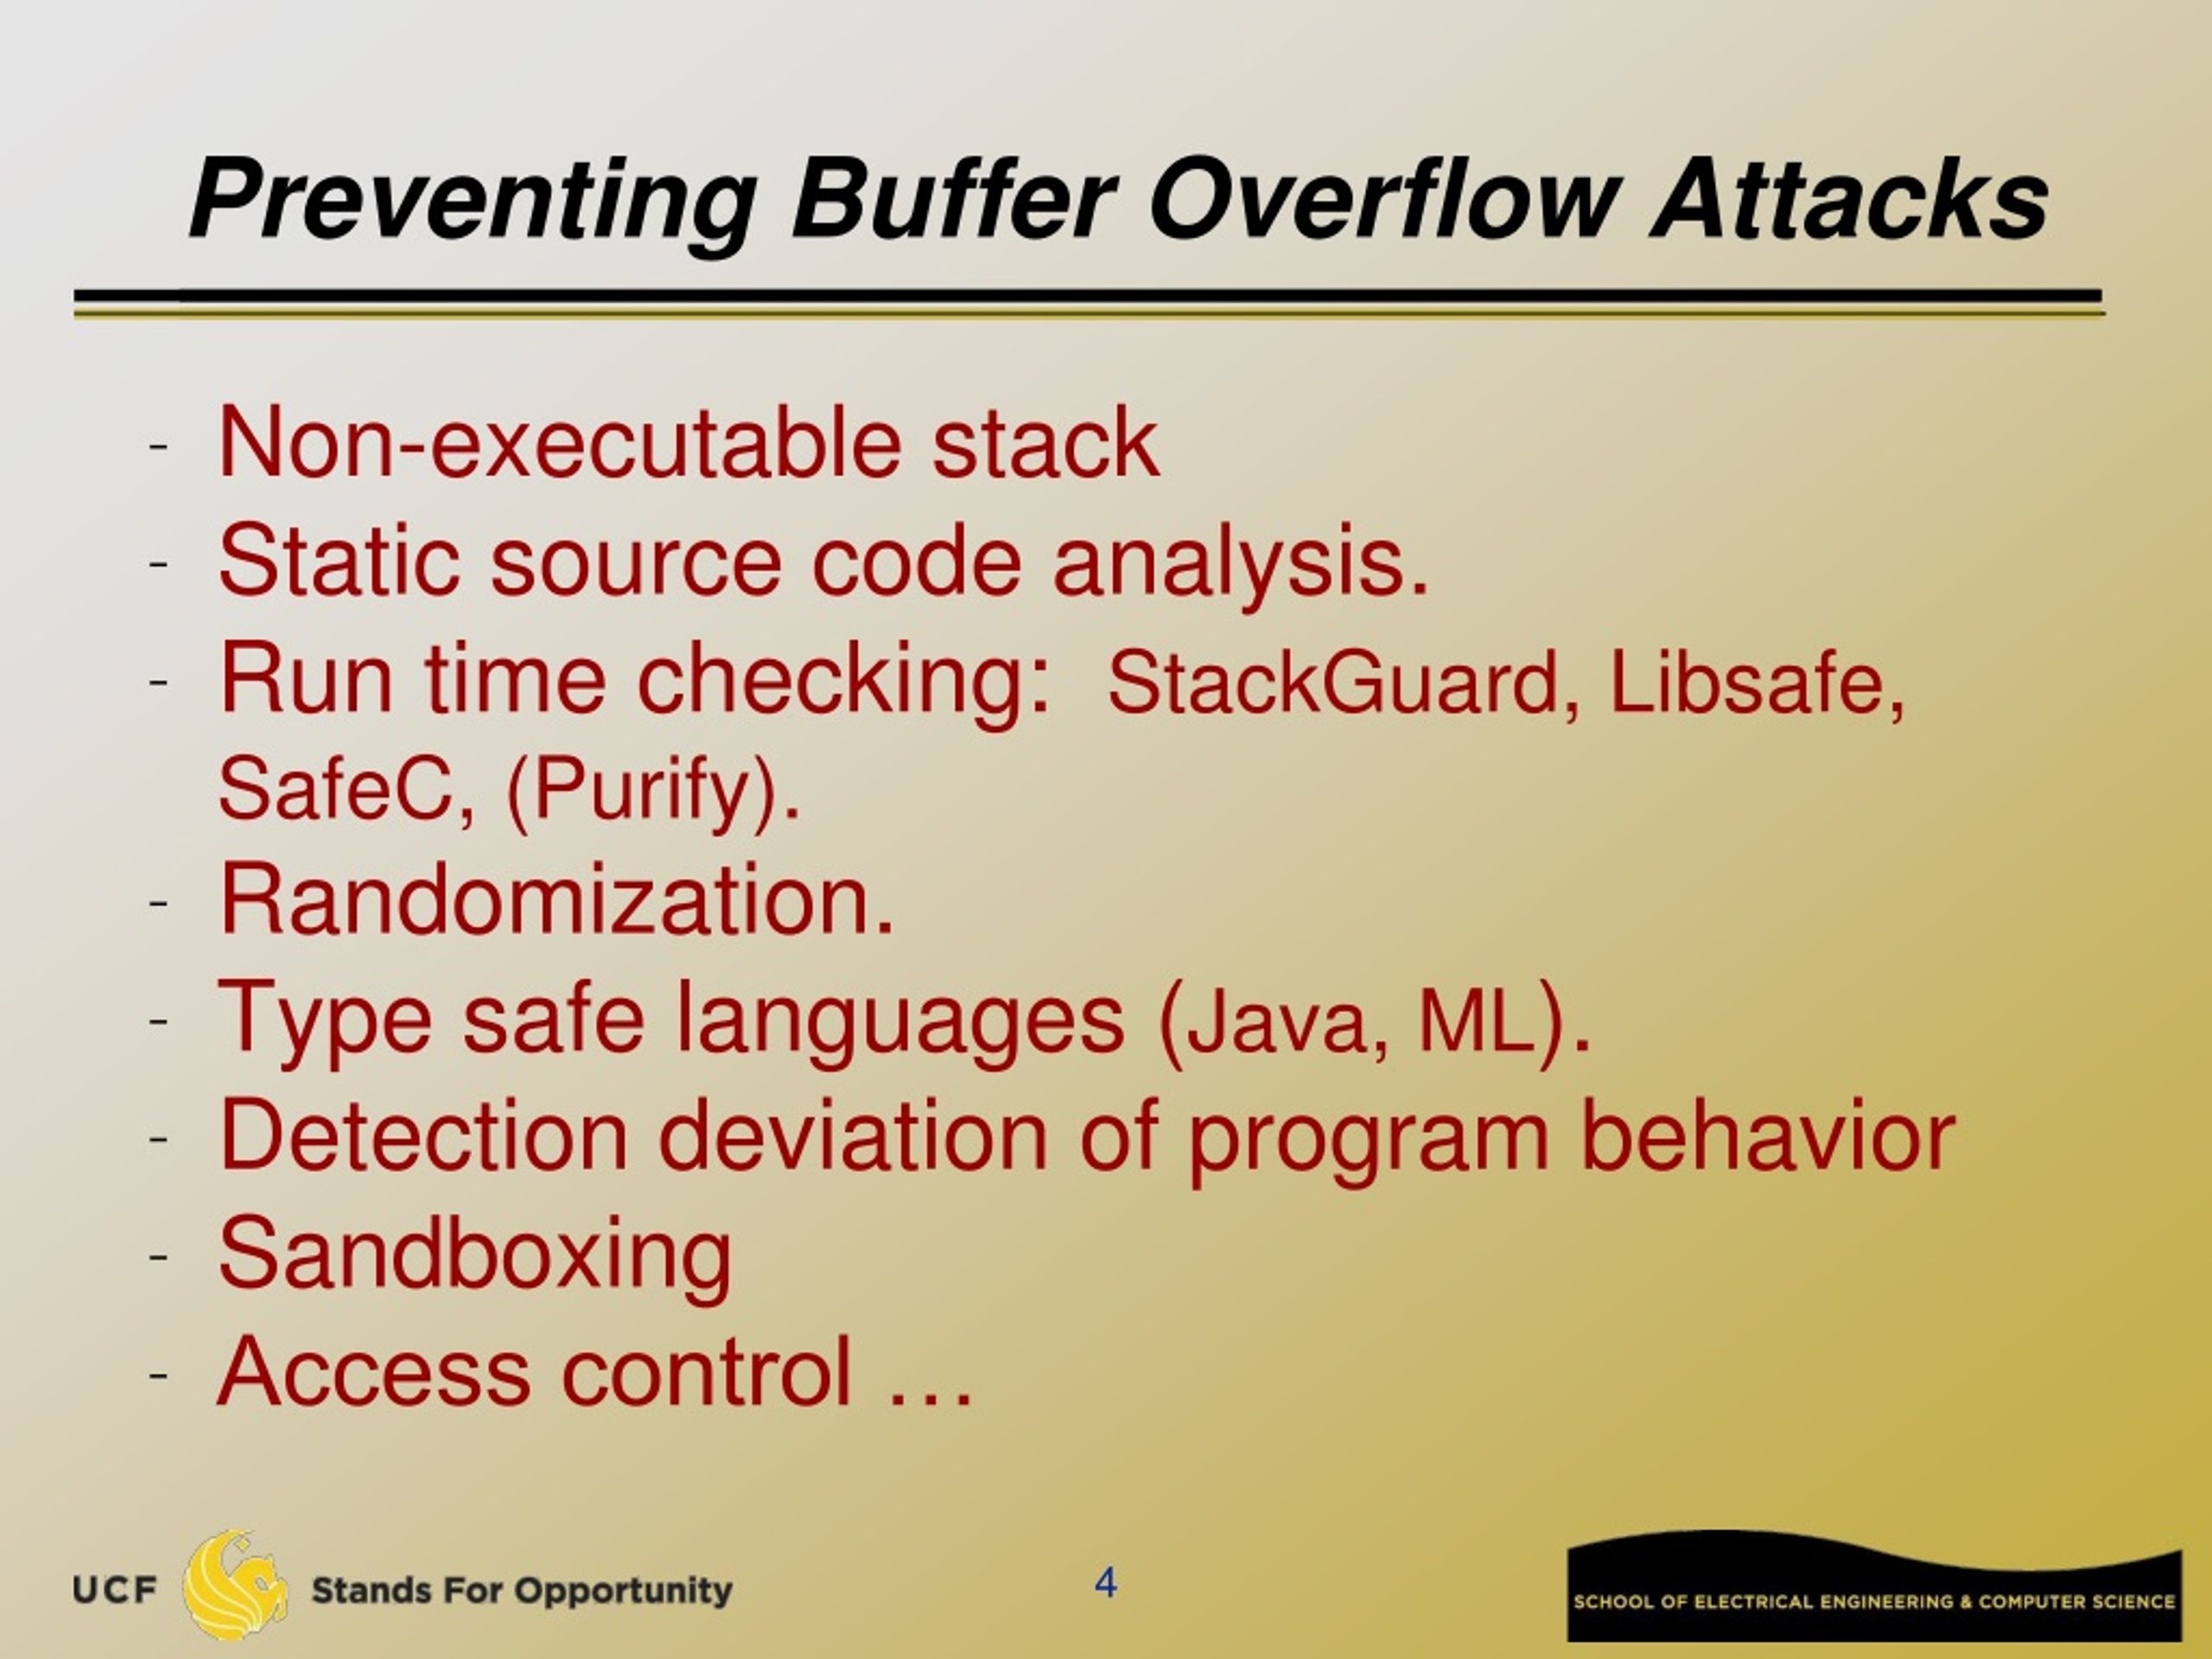 blocked by buffer overflow protection